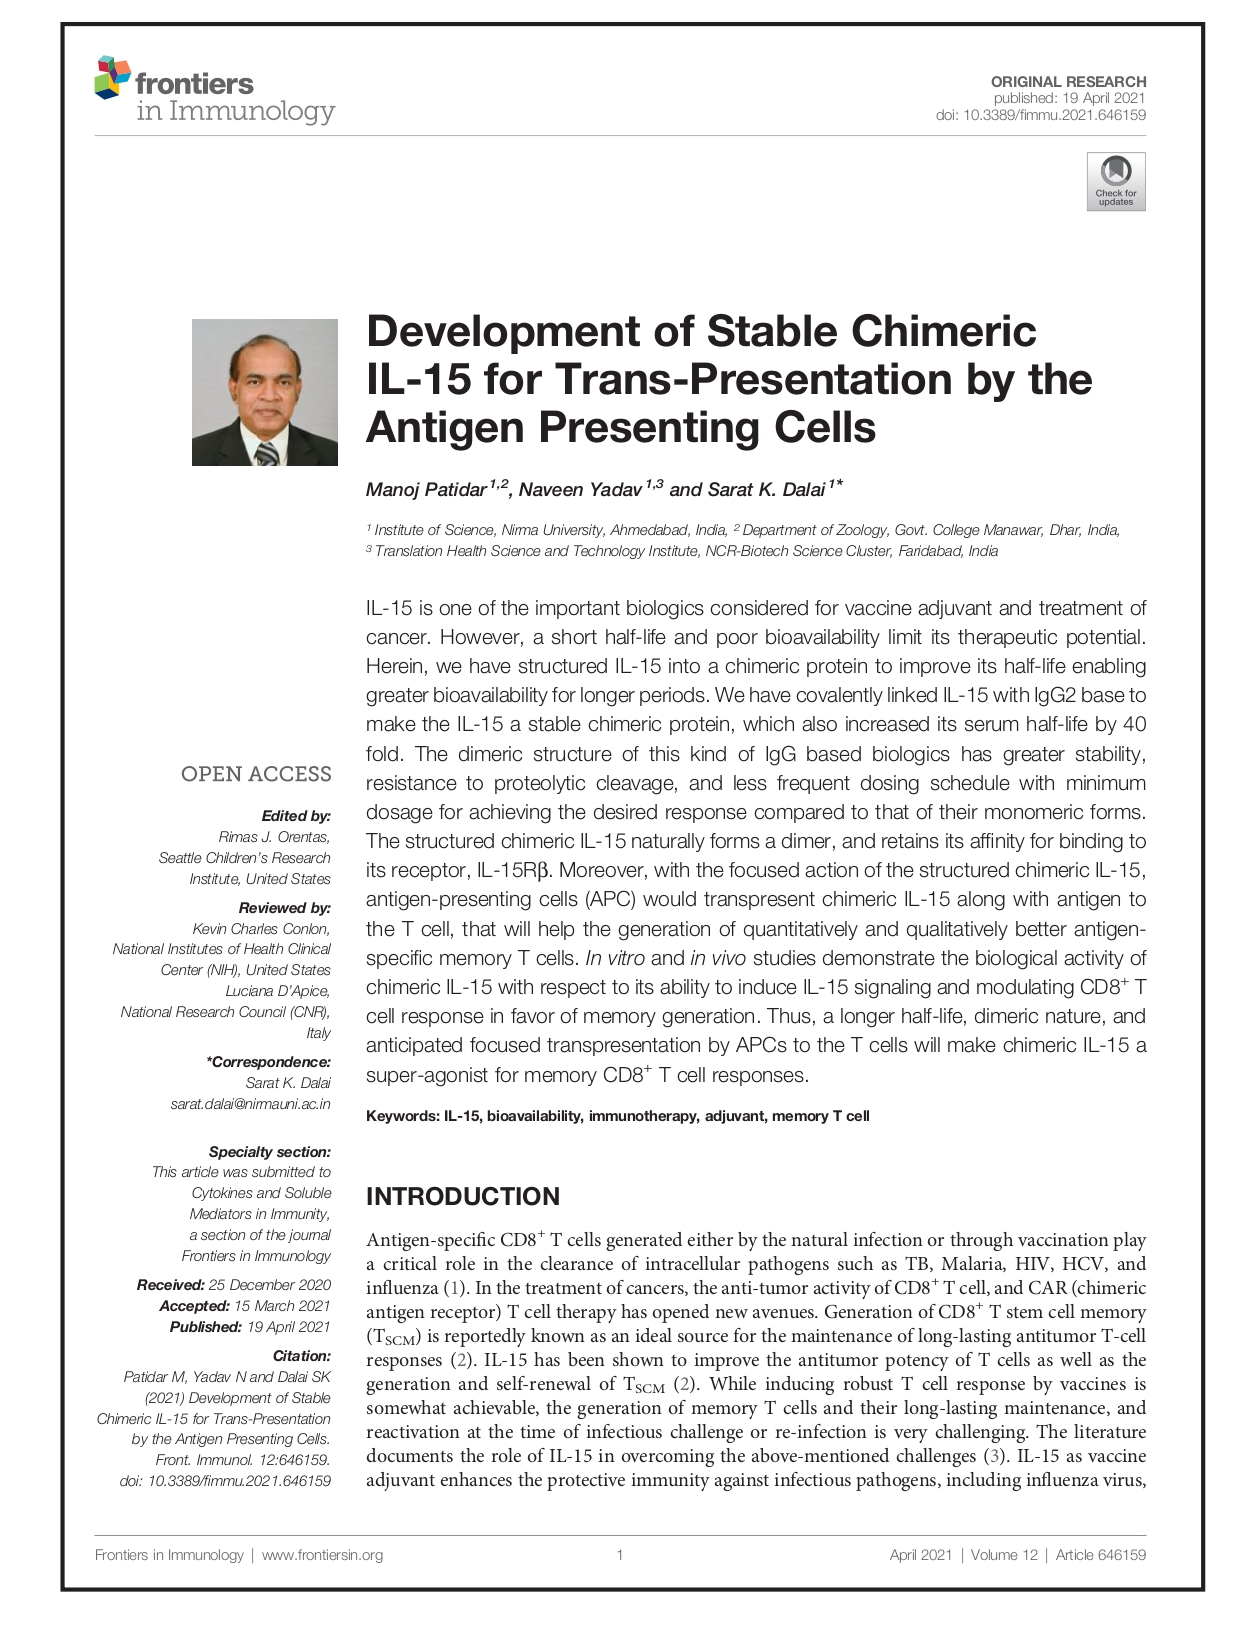 Development of Stable Chimeric IL-15 for Trans-Presentation by the Antigen Presenting Cells